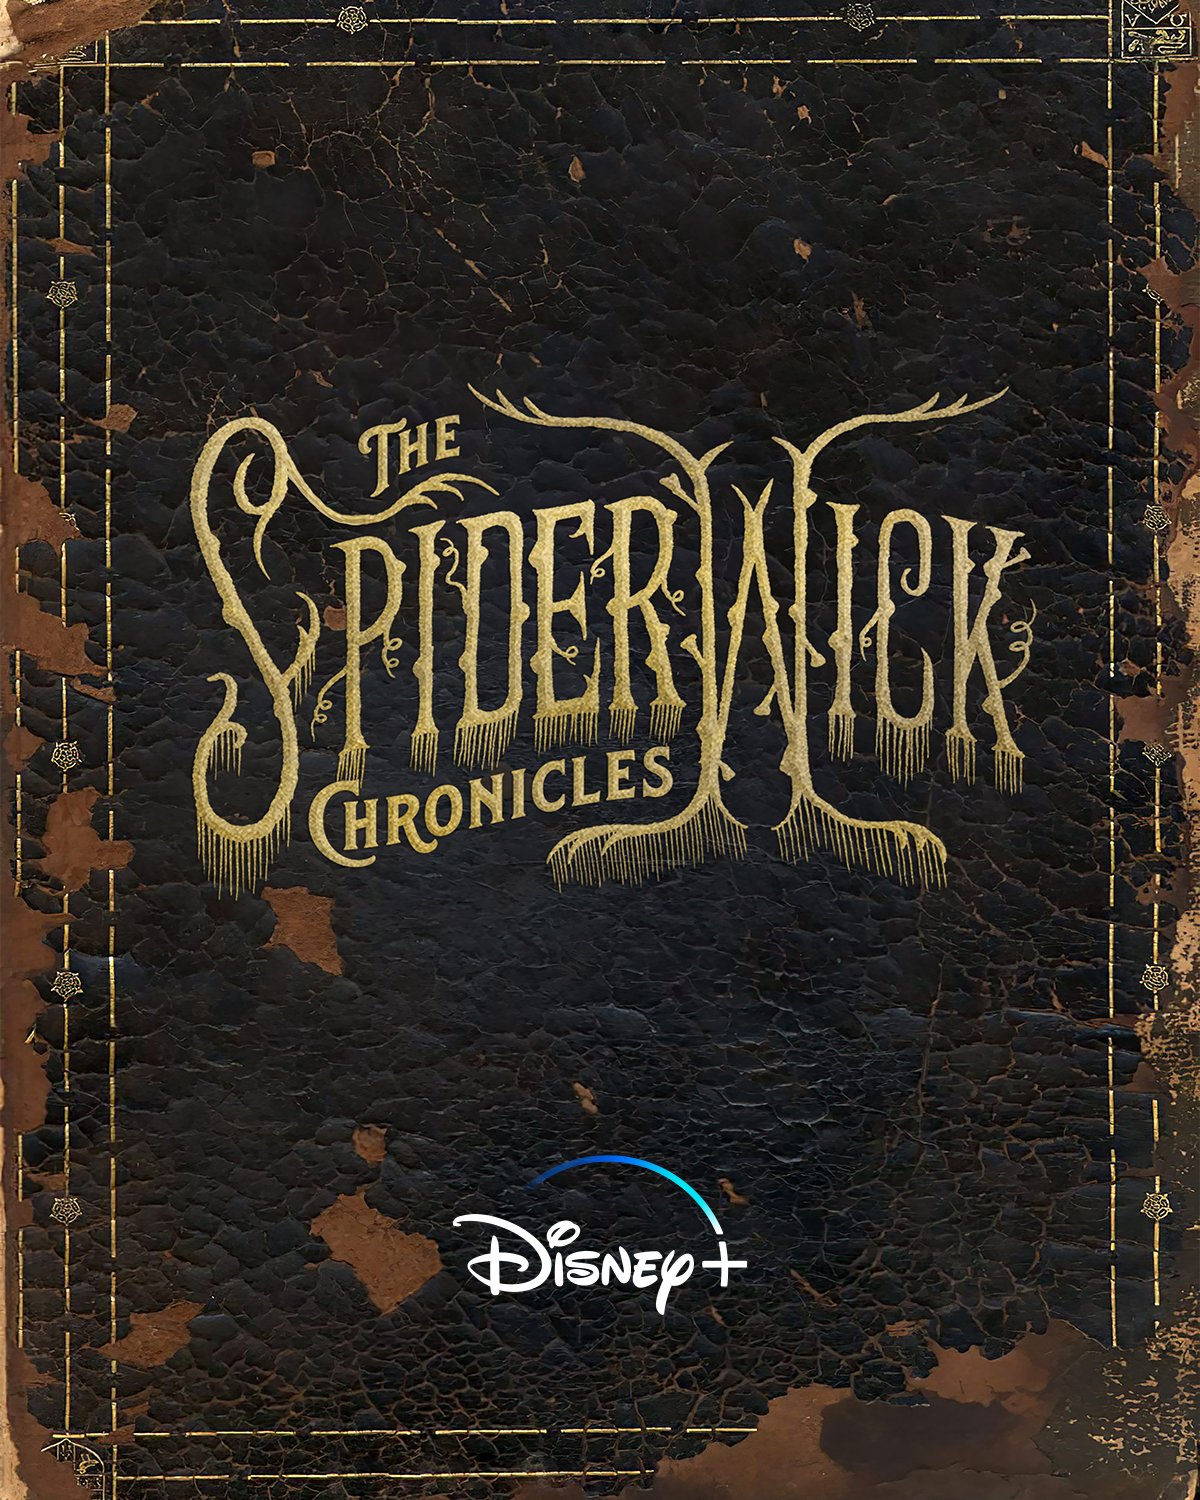 “The Spiderwick Chronicles” Series Coming To Disney+ What's On Disney